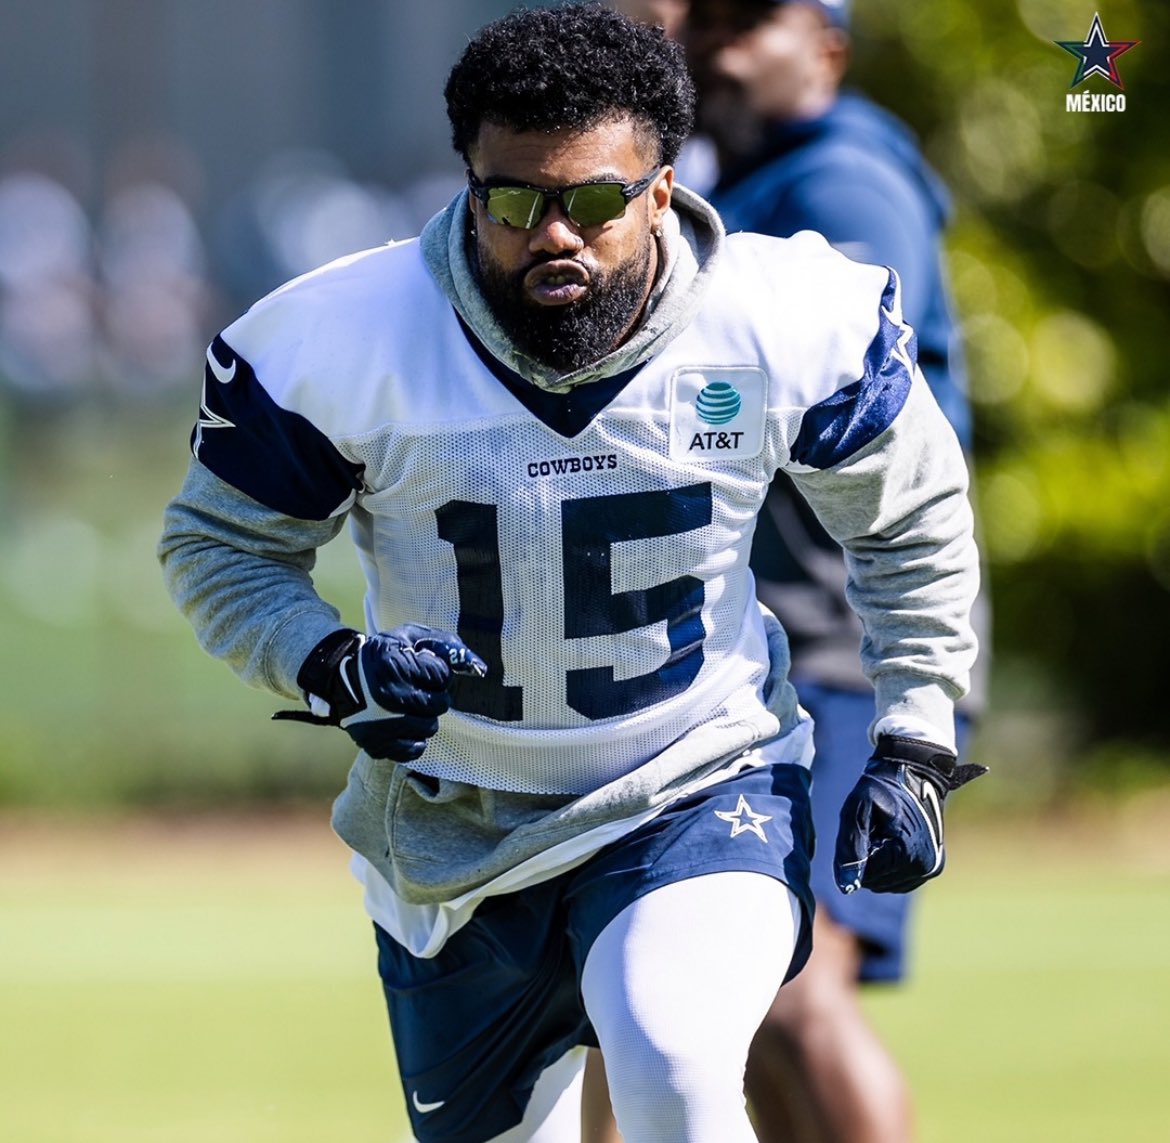 Another storyline with the #Cowboys heading to Cleveland for Week 1 is @EzekielElliott returning to Ohio wearing the No. 15.

In that number, Elliott became the Buckeyes' 3rd All-Time leading rusher and helped bring home a National Championship to Ohio State.

#DallasCowboys